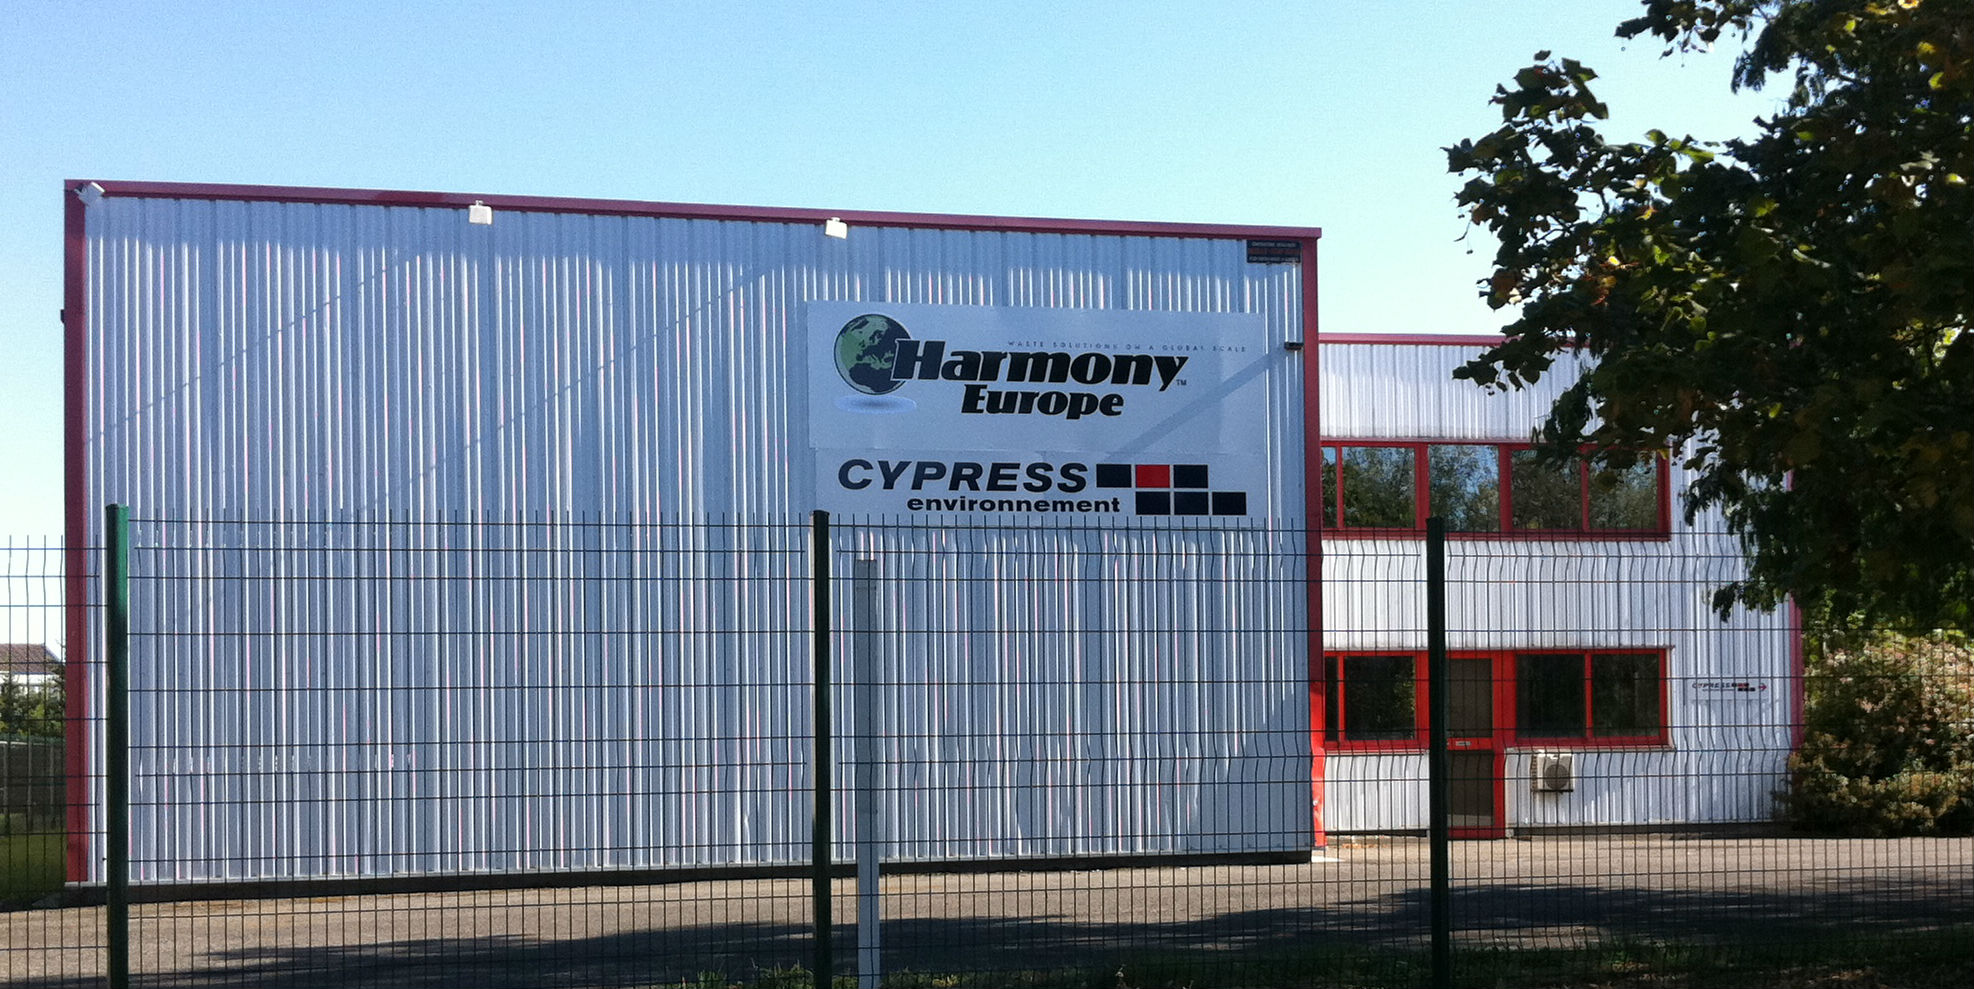 Harmony Europe in Toulouse, France provides more than equipment!